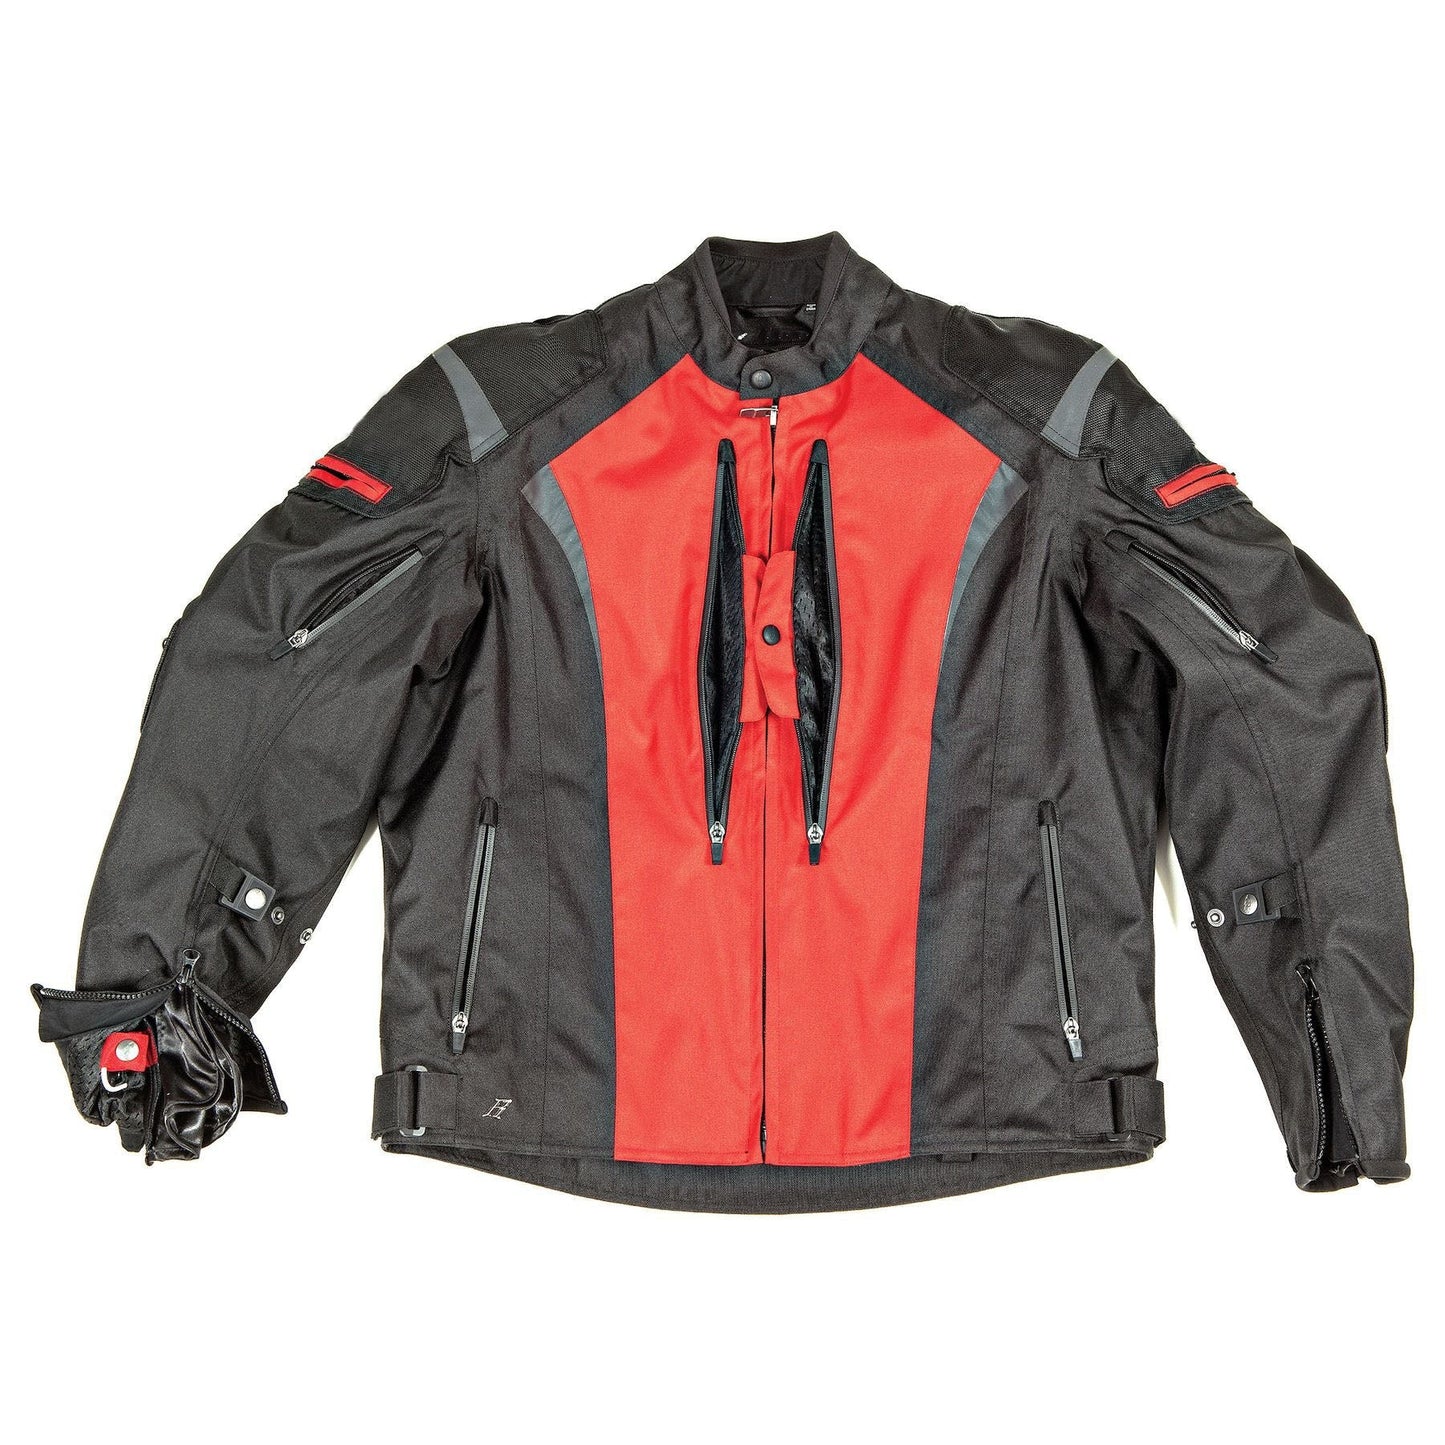 Red/Black Touring Motorbike Textile CE Armor Cordura Jacket - All Colors Available - Unisex